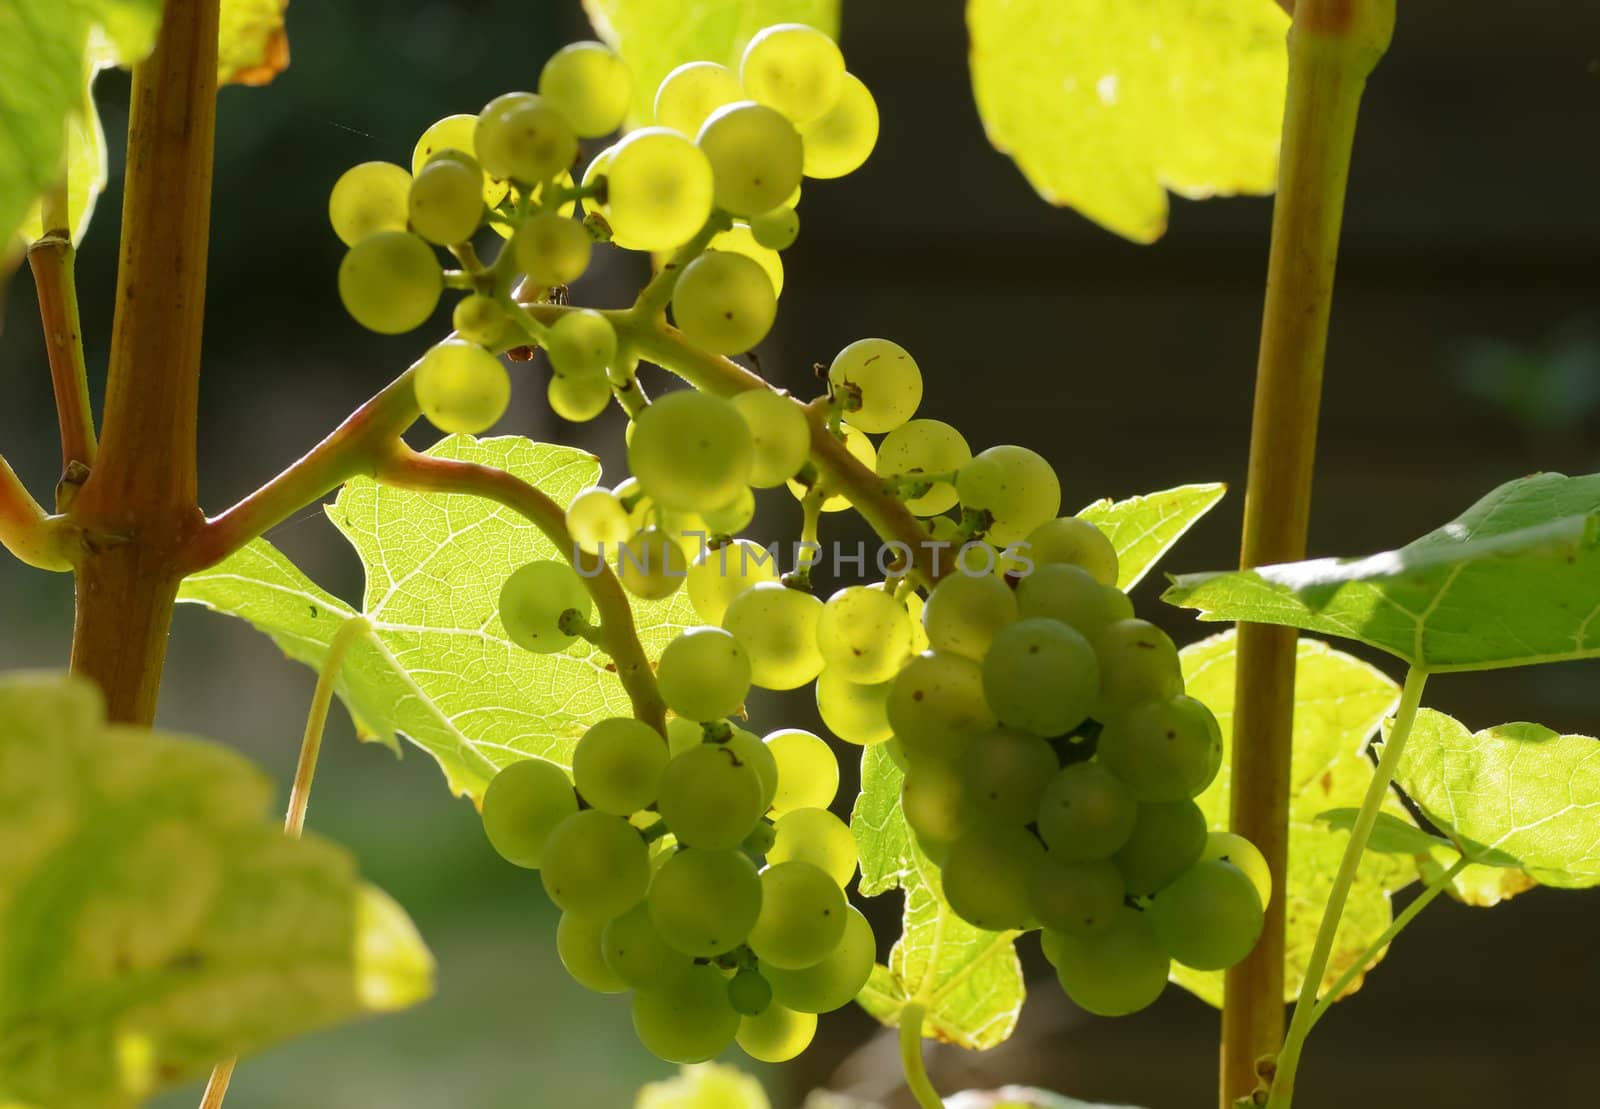 grapes on the vine by FotoFrank